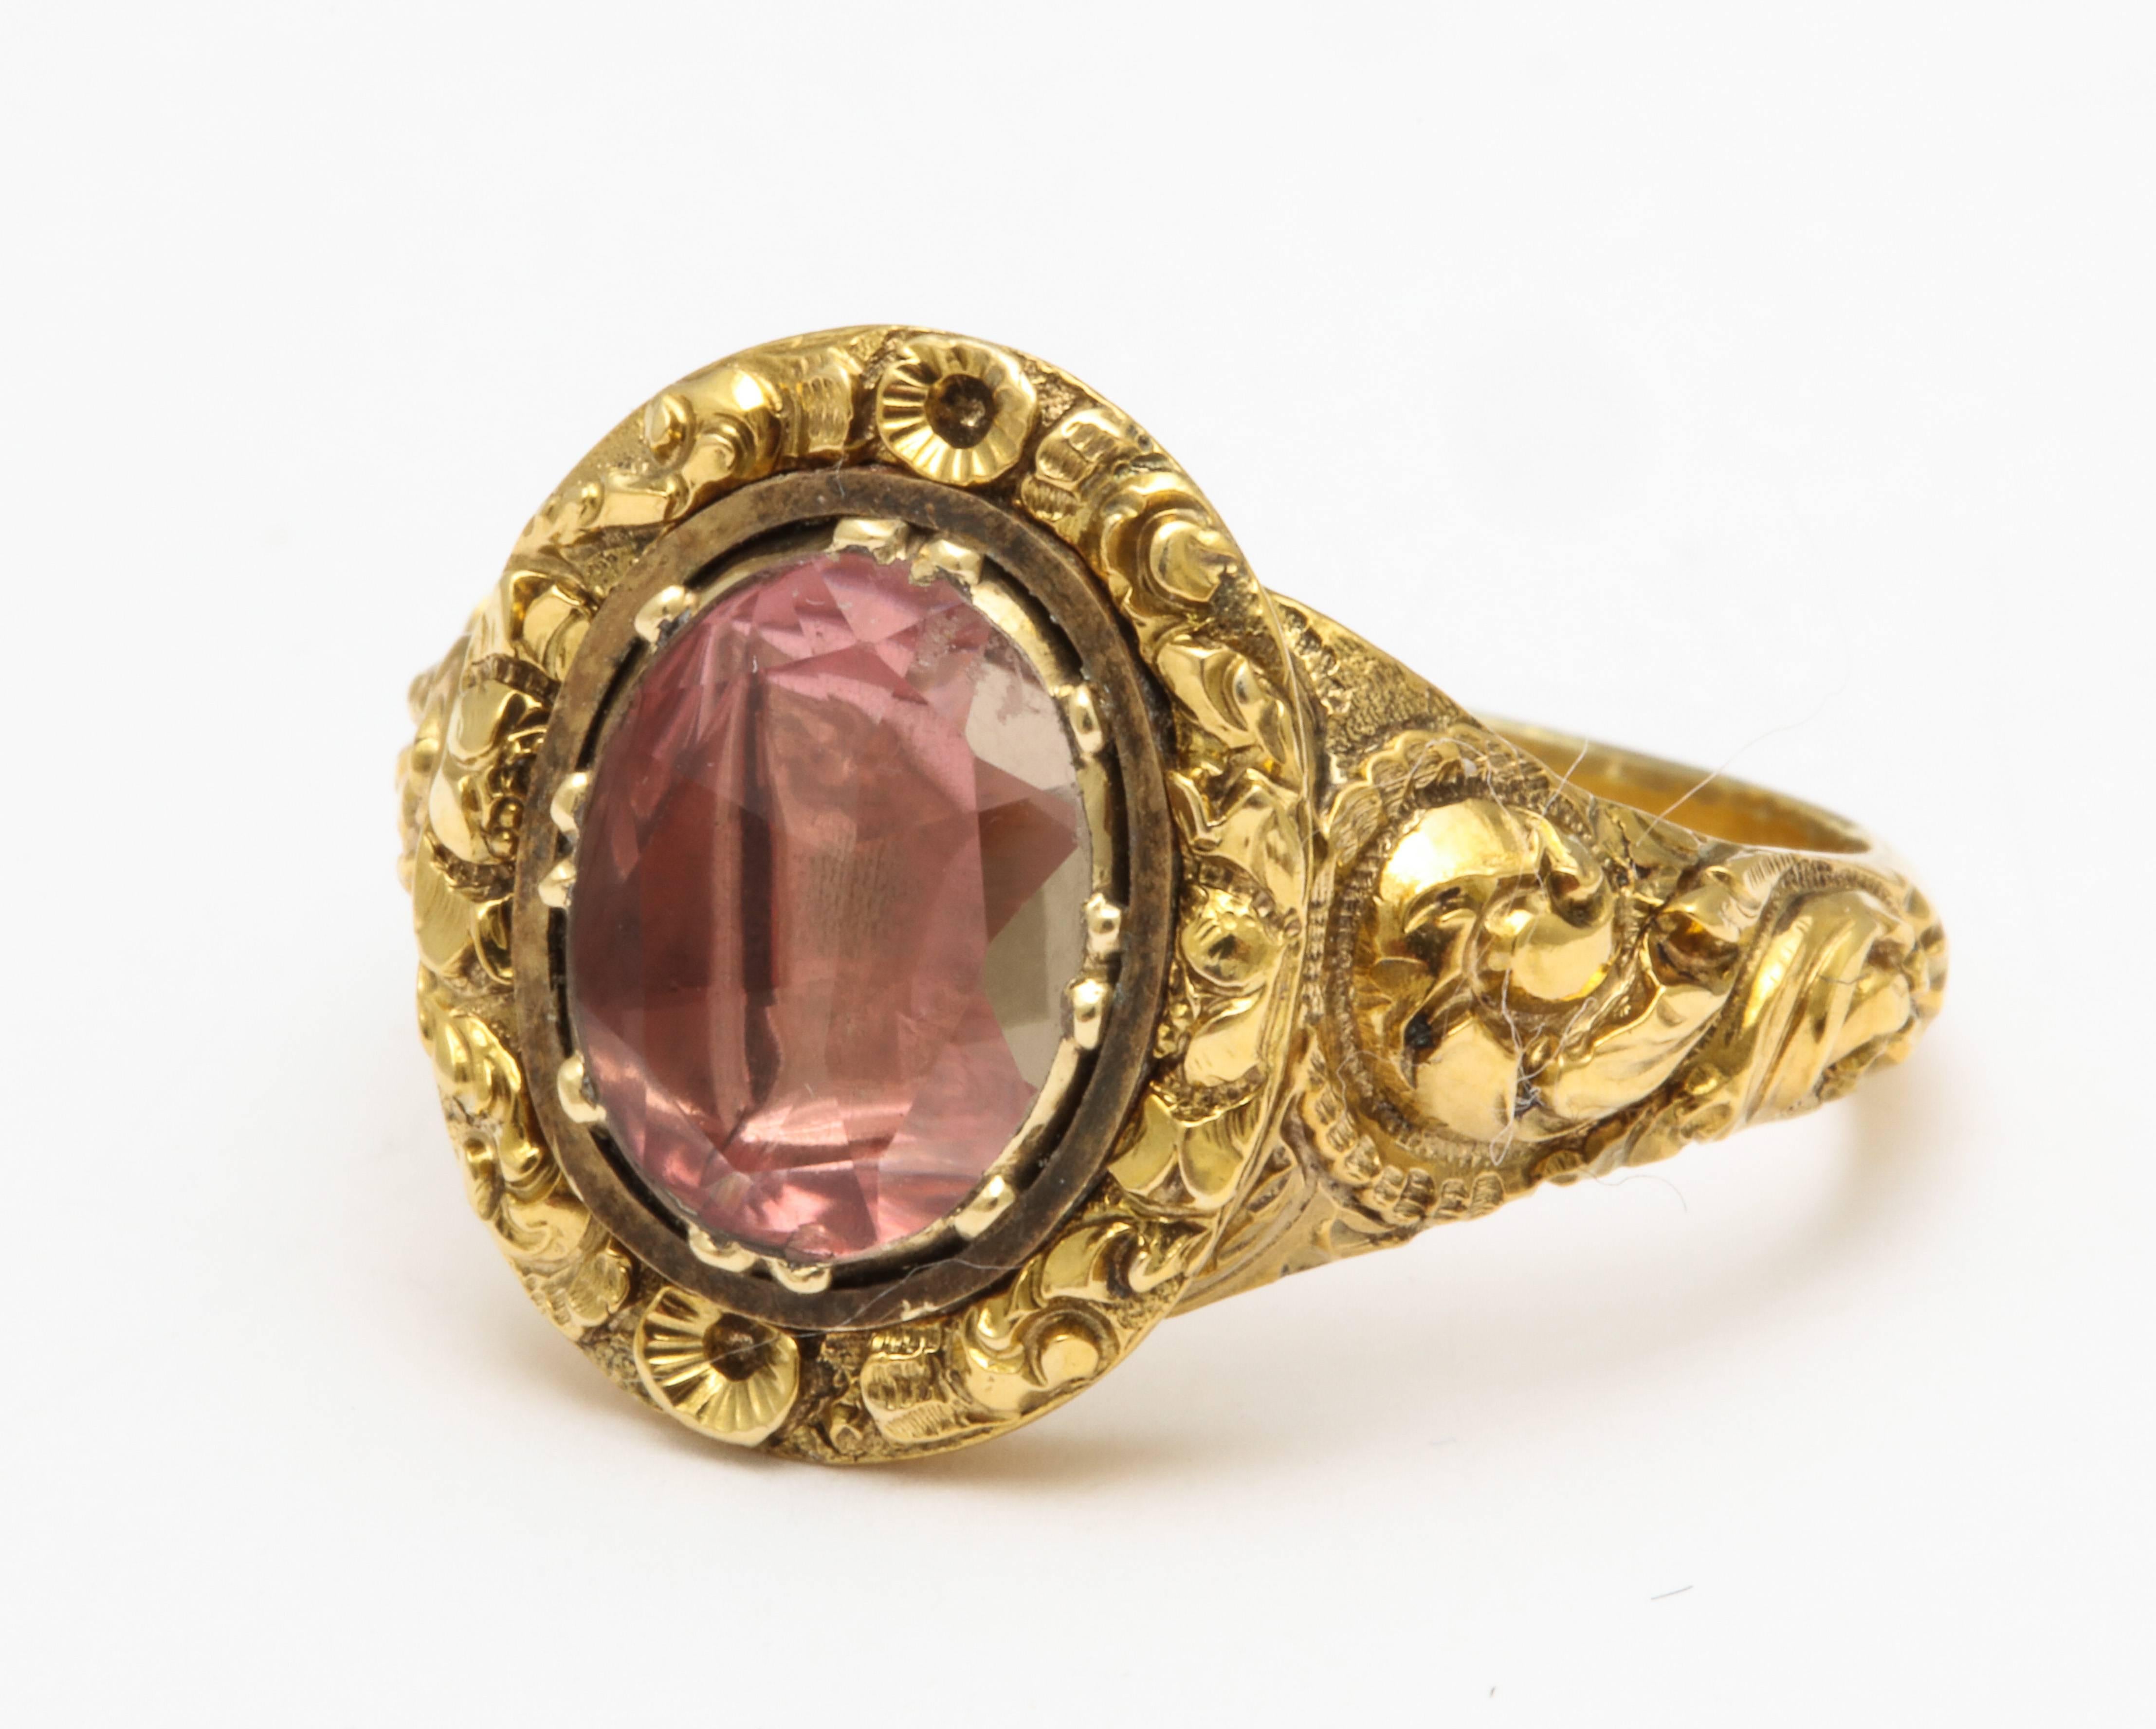 As if the pink crystal were dropped in a garden, it rests among deeply engraved and chased flowers and foliate motifs in a 15kt gold, vibrant, pink foiled Georgian setting c. 1820. The ring has a lush presence as the chasing is generous and well